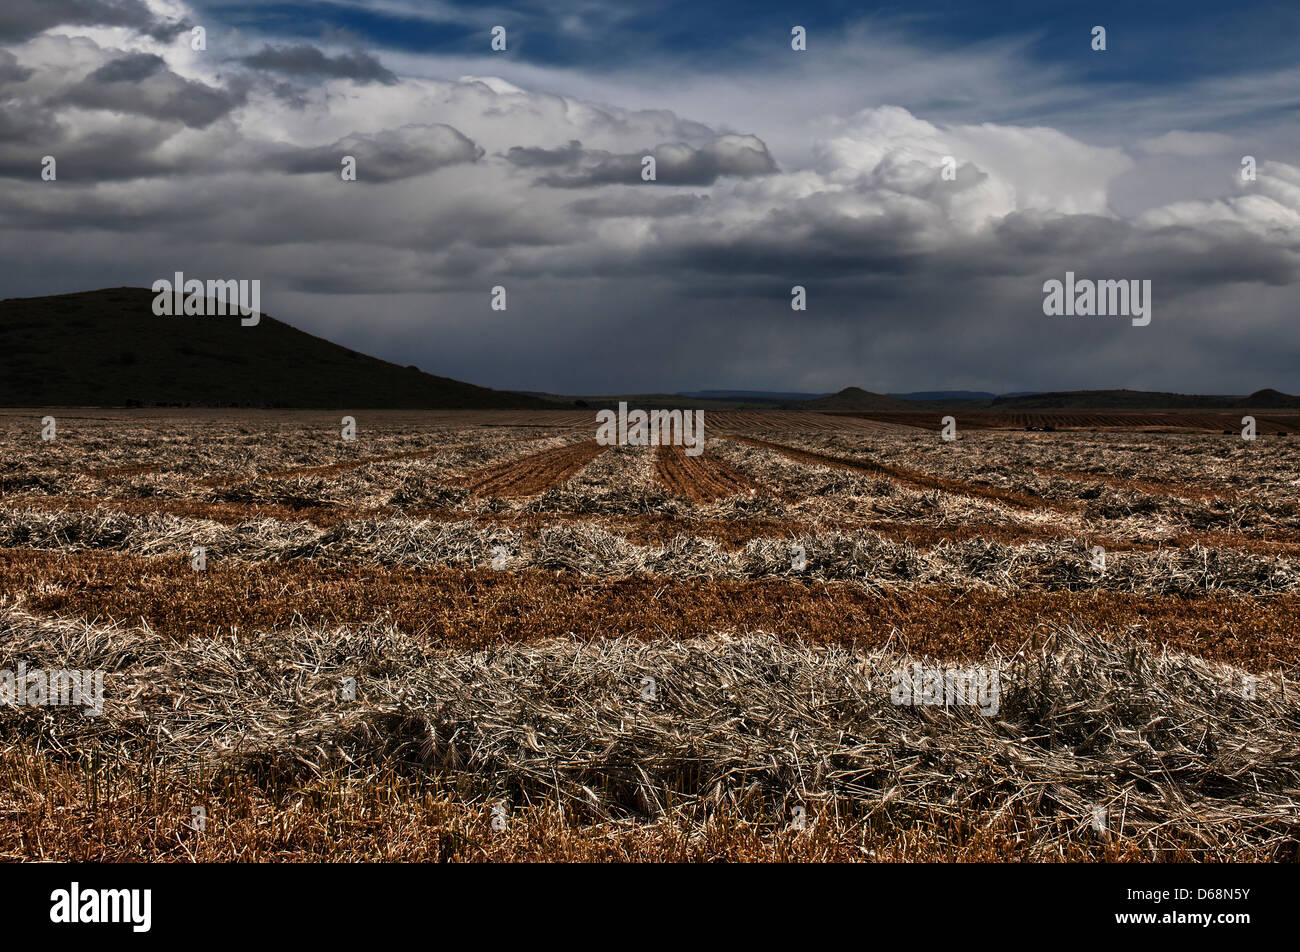 Digitally manipulated image of a field with dramatic sky Stock Photo